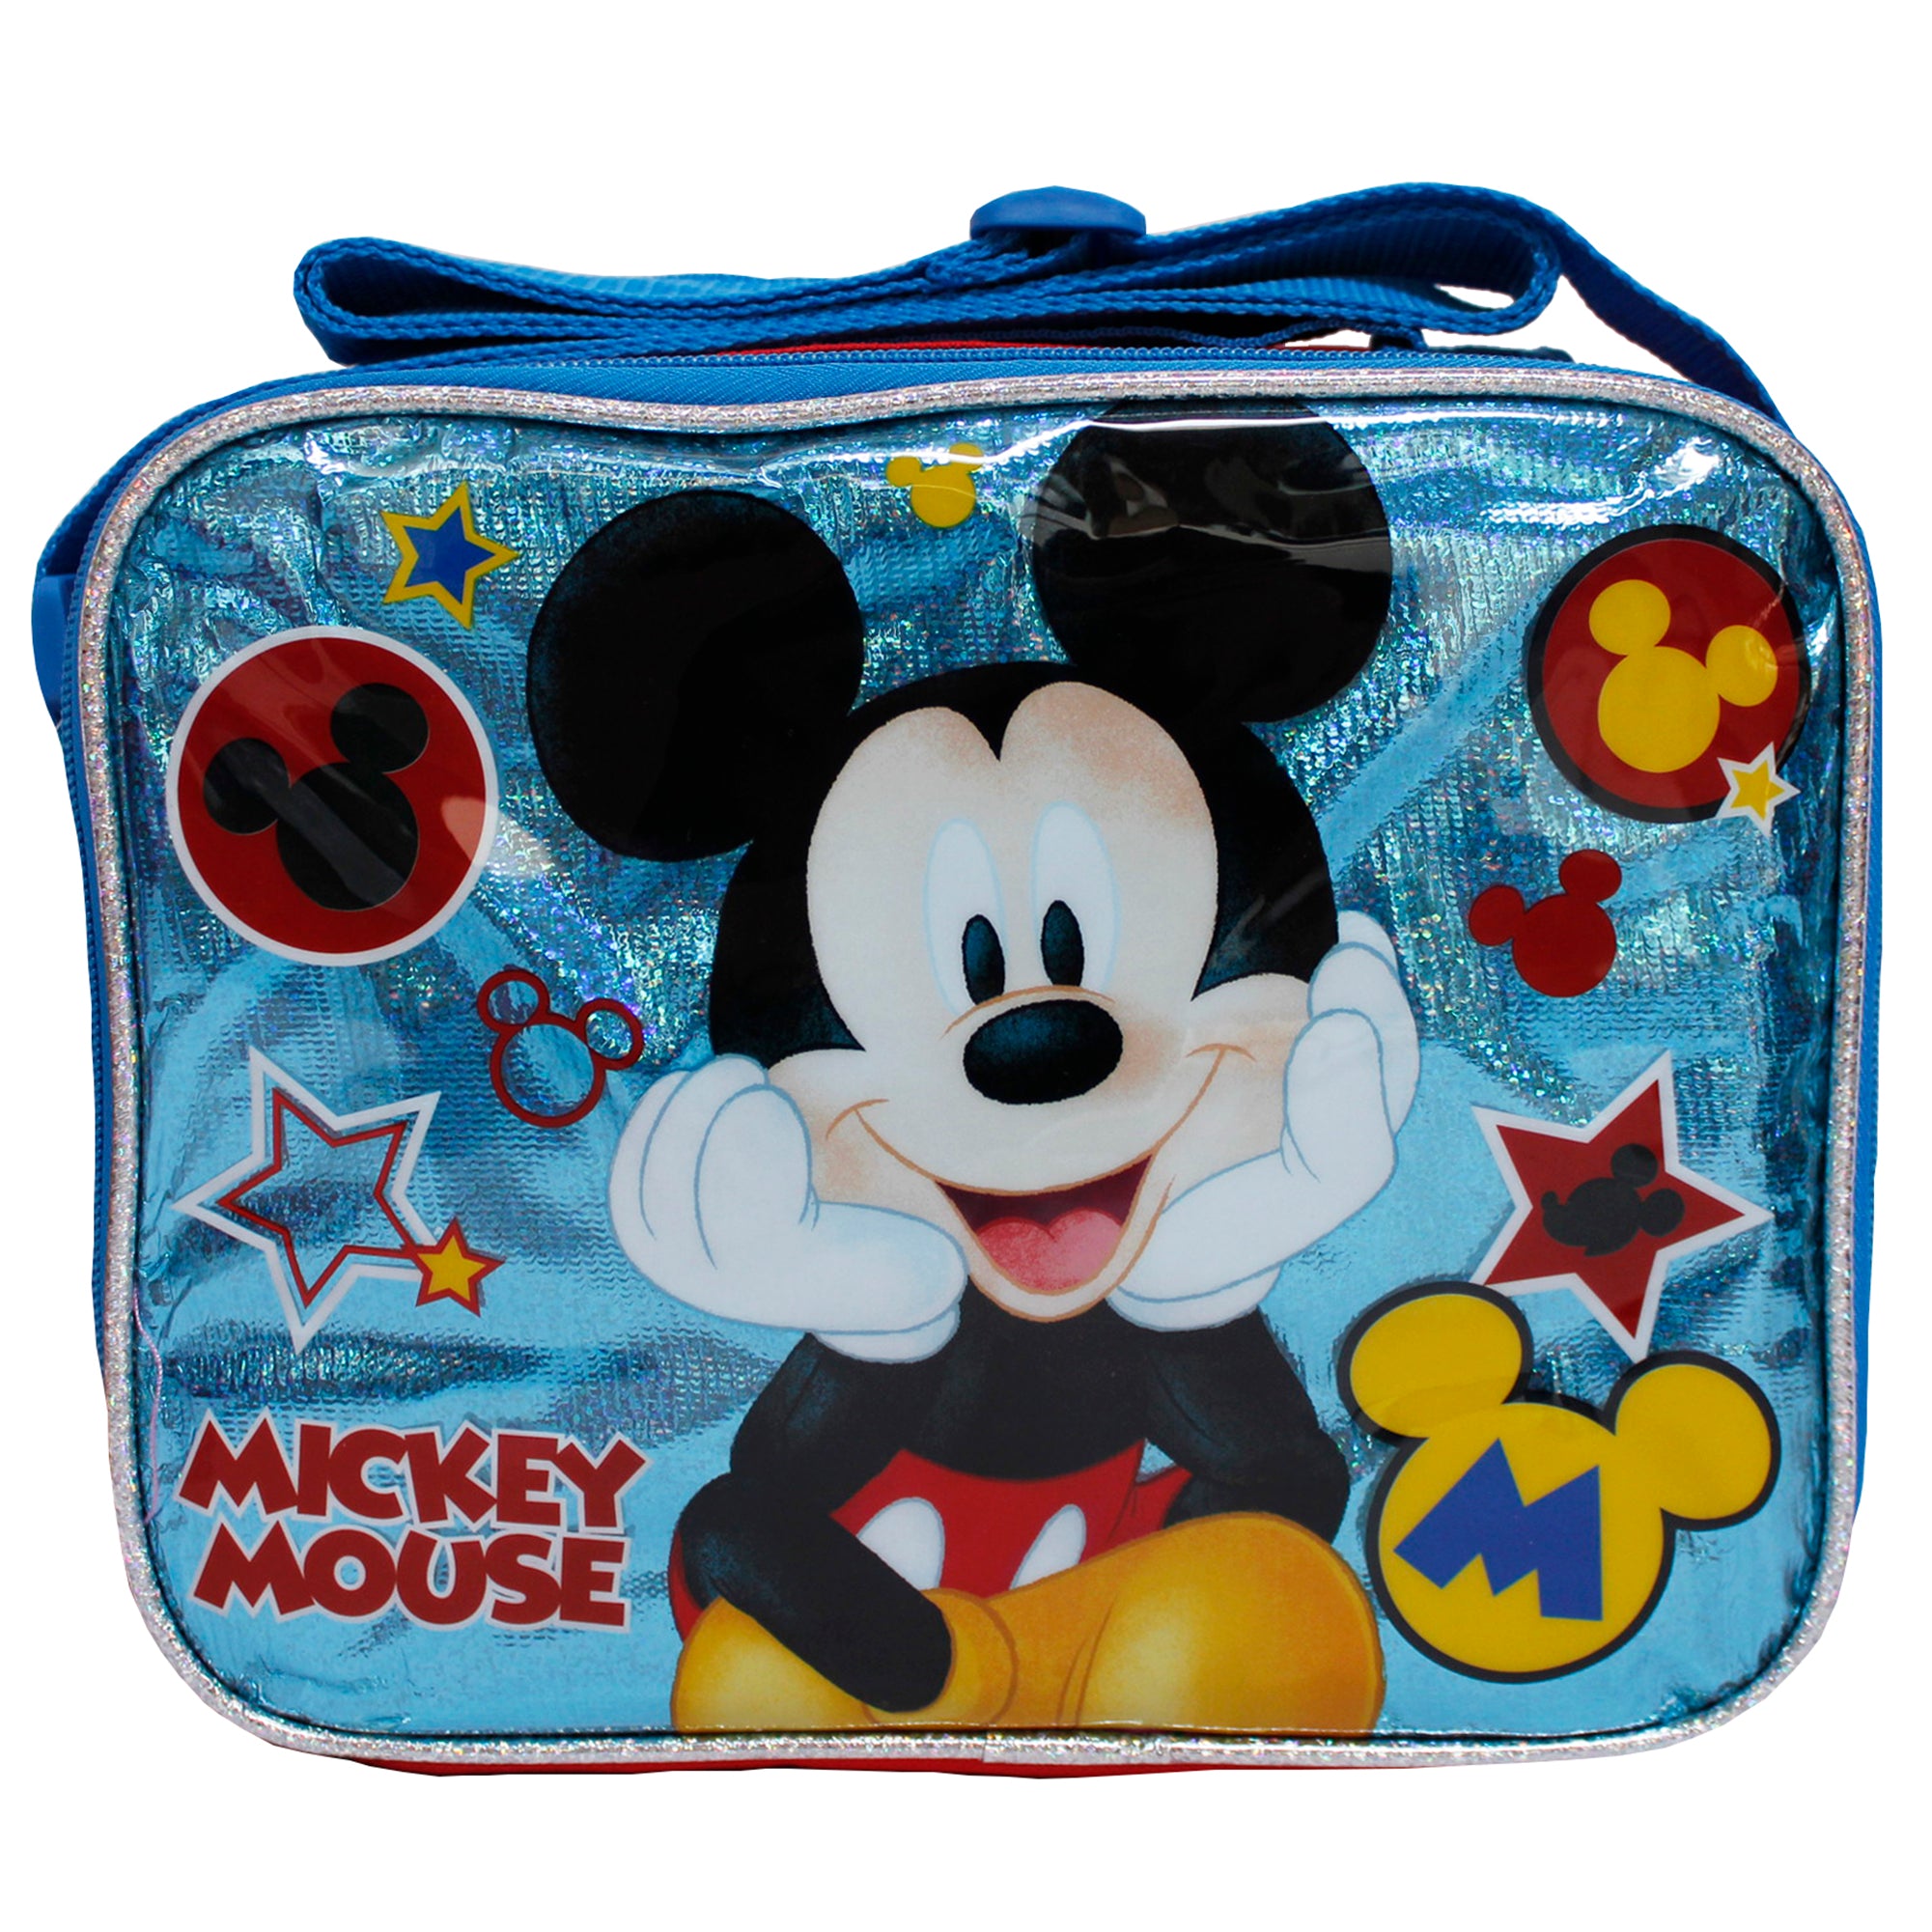 Mickey Mouse - Suitcases, backpacks and toiletry bags | Buy online at  Smalltraveller.eu